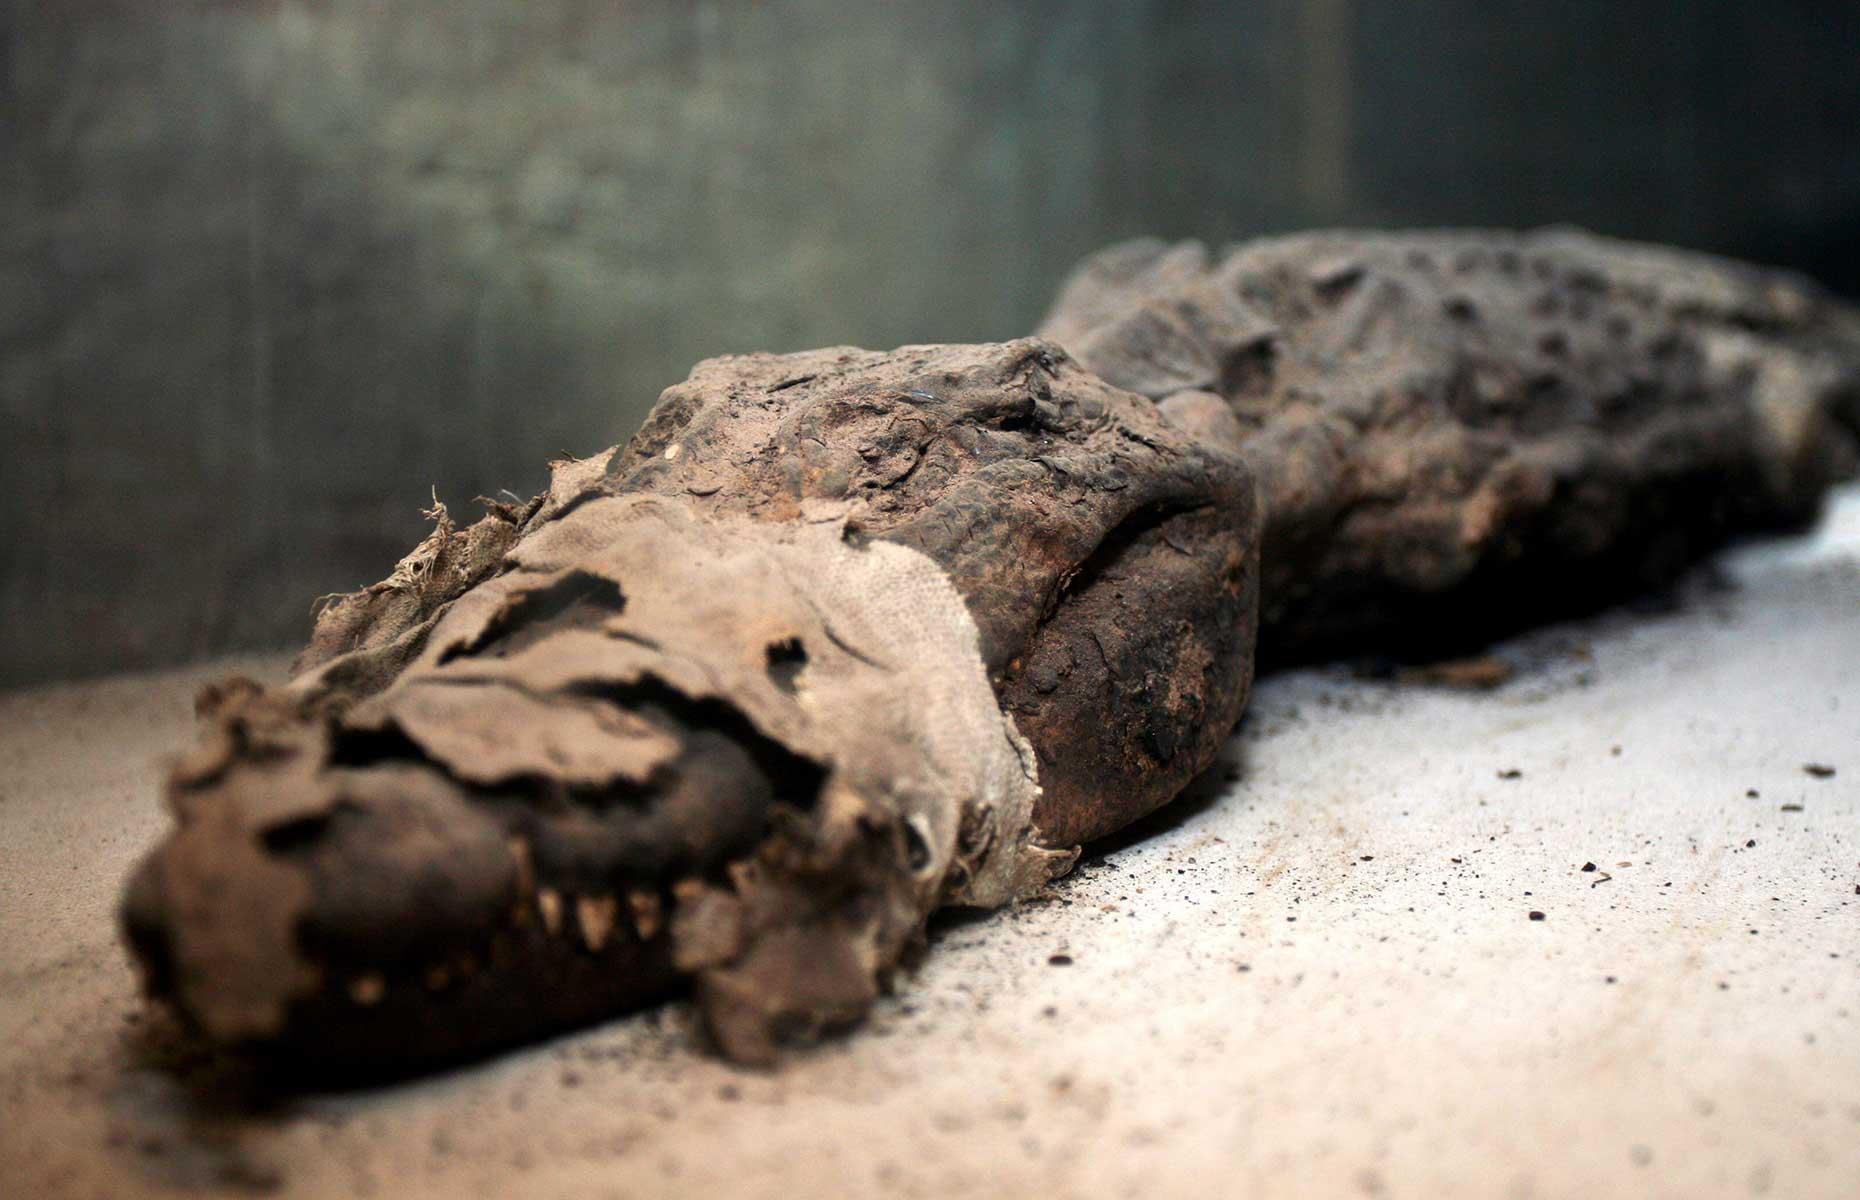 <p>In 2019, archaeologists digging at the Qubbat al-Hawā burial site in southern Egypt unearthed 10 mummified crocodiles. A recent 2023 study has finally confirmed these ancient reptiles date back <a href="https://edition.cnn.com/videos/travel/2023/01/19/mummified-crocodiles-egyptian-tomb-bb-lon-orig-cprog.cnn">over 2,300 years</a> to the pre-Ptolemaic era (i.e. before 304 BC). Rather uniquely, they were found in a well-preserved condition, with their sizes ranging from six to 11 feet (1.8-3.5m) long. It's believed these crusty crocs were mummified as an offering to the crocodile-headed Egyptian god, Sobek. Pictured here is another mummified crocodile found in Egypt, held in the Crocodile Museum of Kom Ombo. </p>